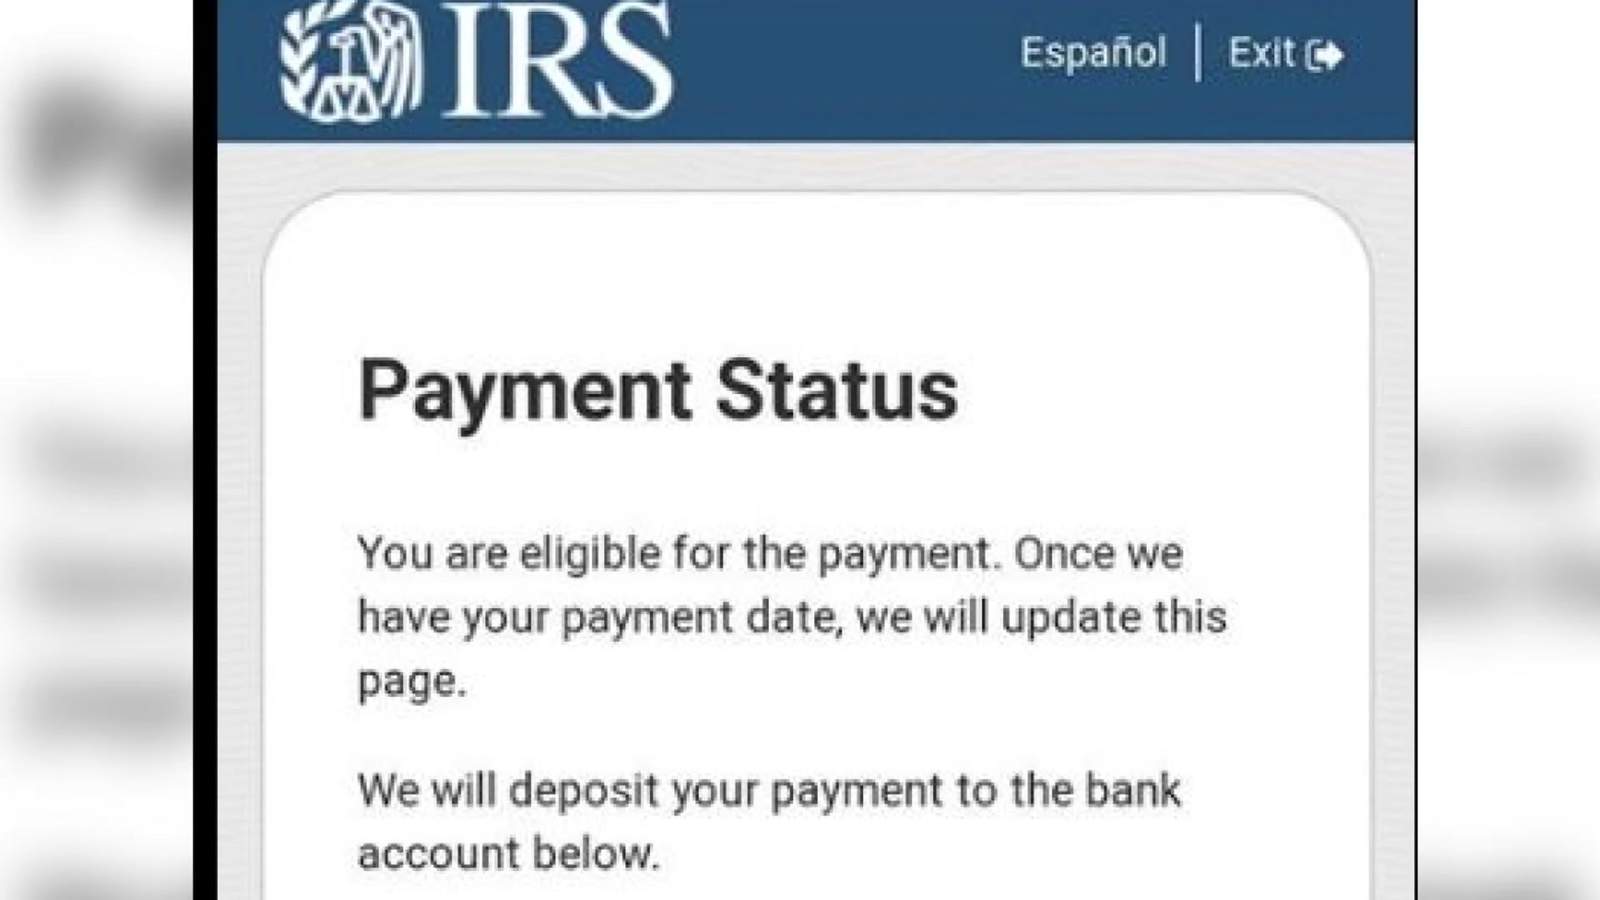 Still waiting for stimulus money? Thousands sign petition demanding answers from IRS